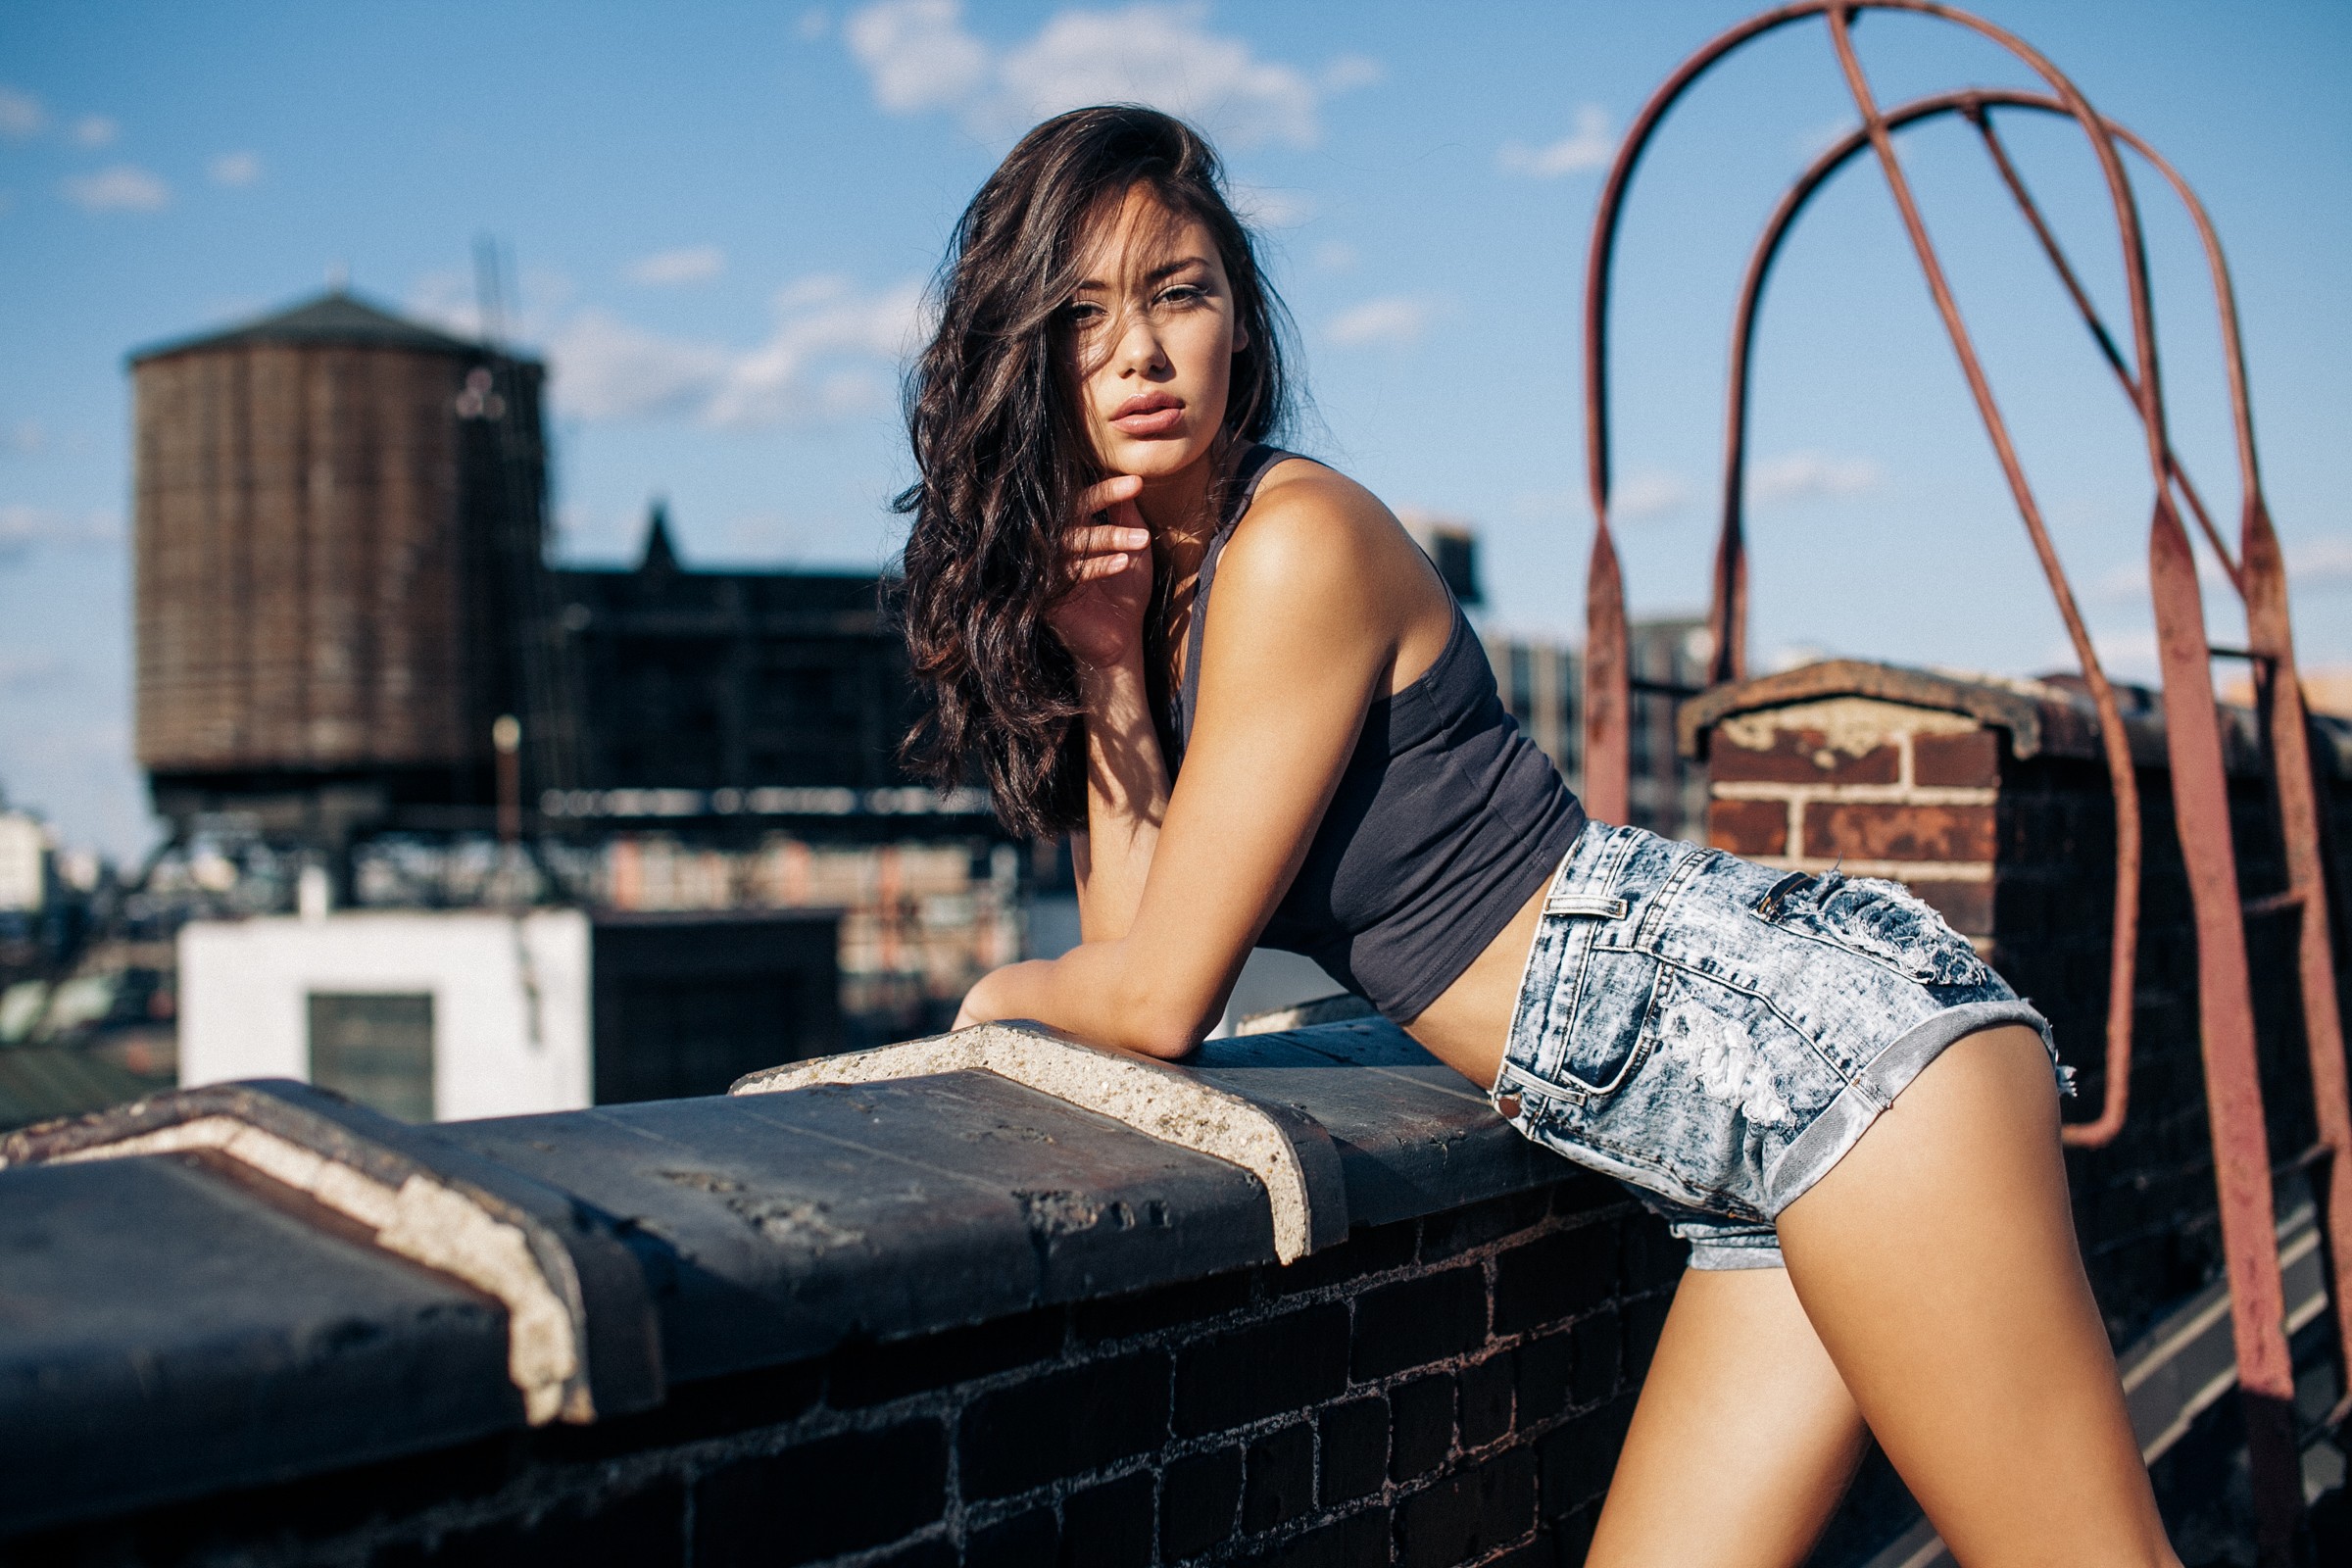 People 2400x1600 women brunette legs tank top T-shirt shorts jean shorts rooftops bare shoulders looking at viewer long hair women outdoors model urban hair in face bent over